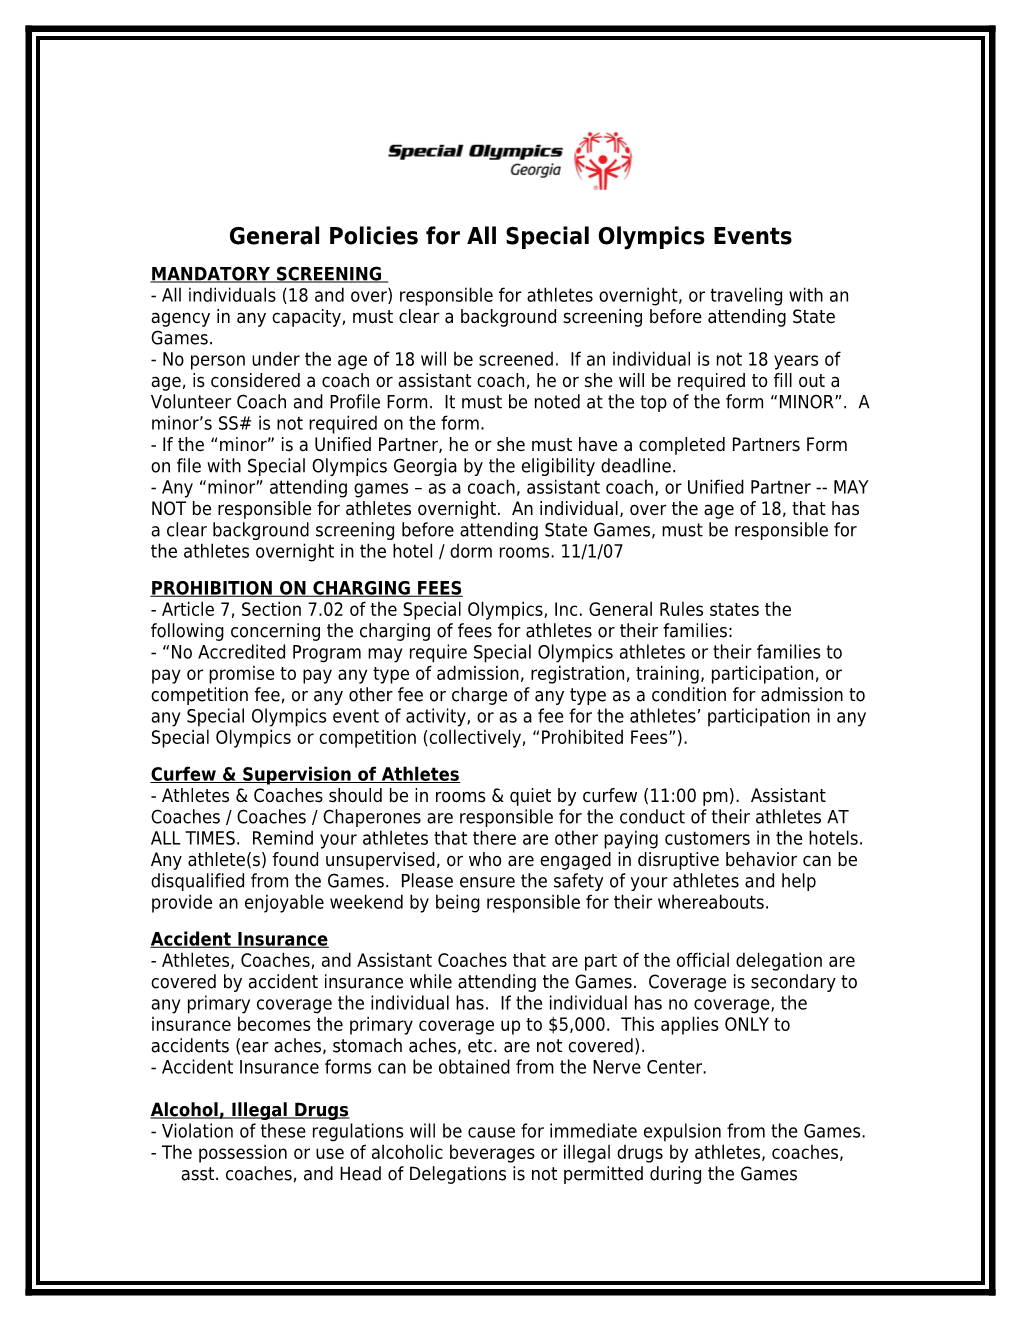 General Policies for All Special Olympics Events